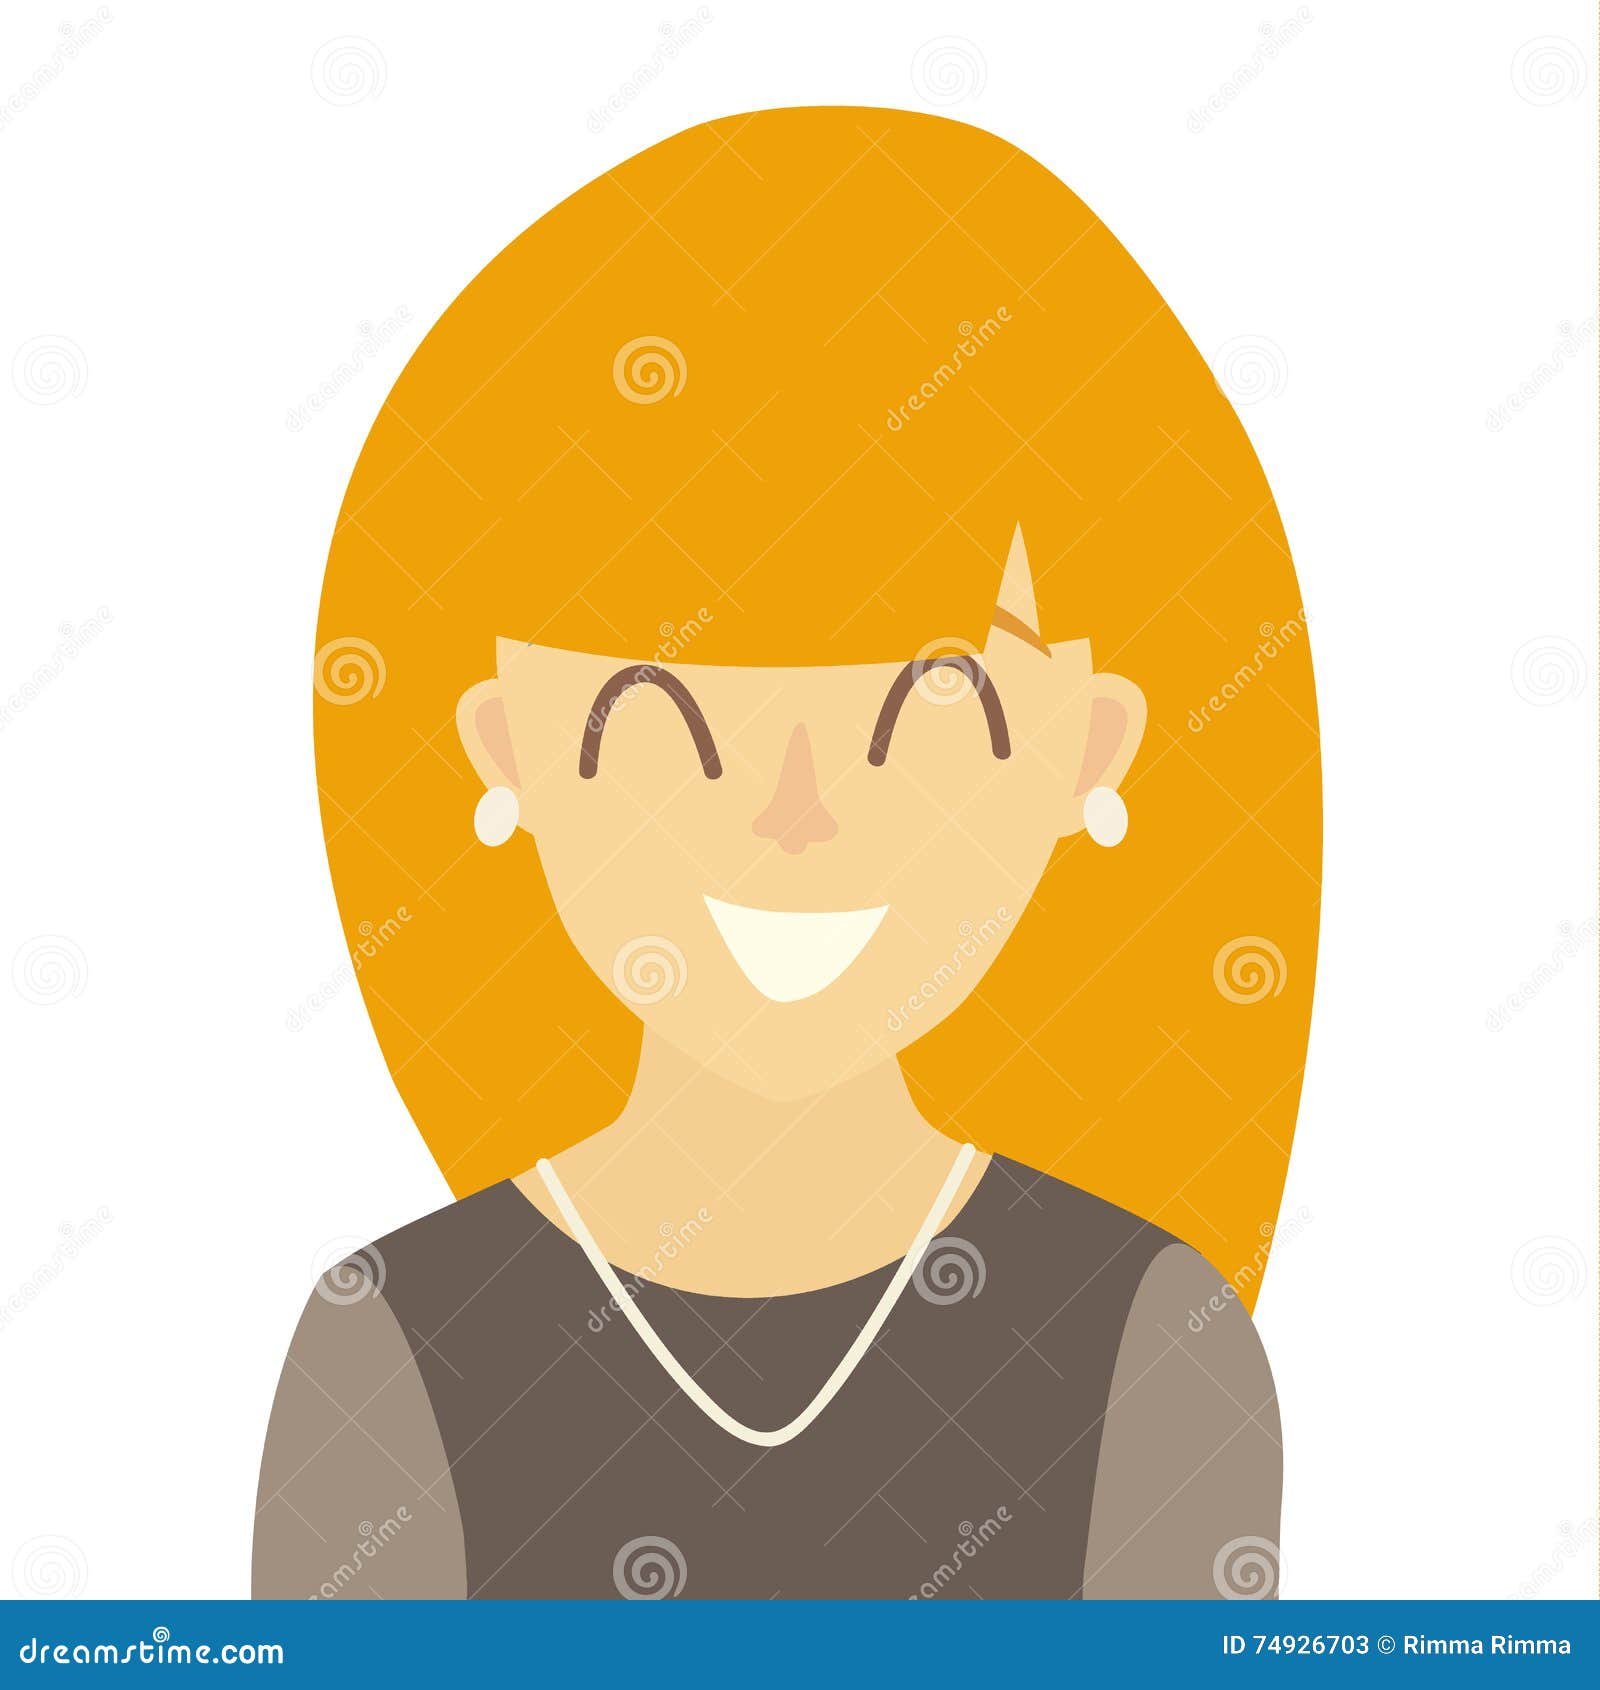 Avatar woman red hair business people person - Avatar & Emoticons Icons